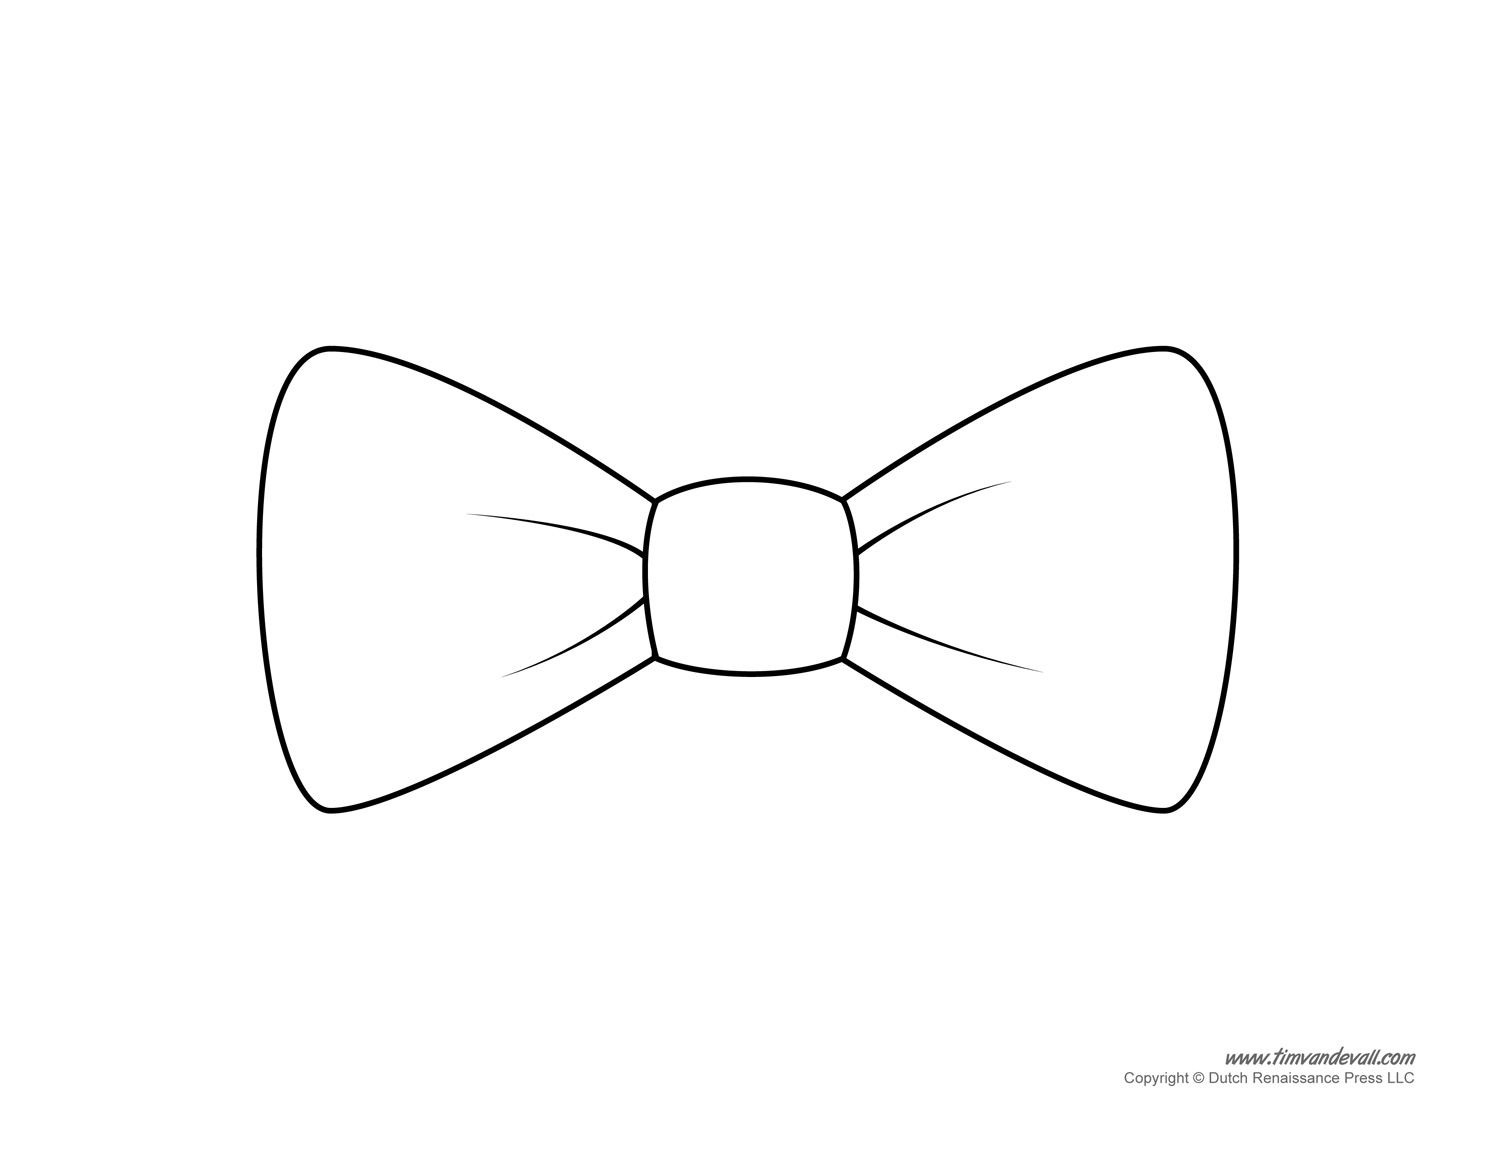 Free Bow Tie Clipart Black And White, Download Free Bow Tie Clipart ...